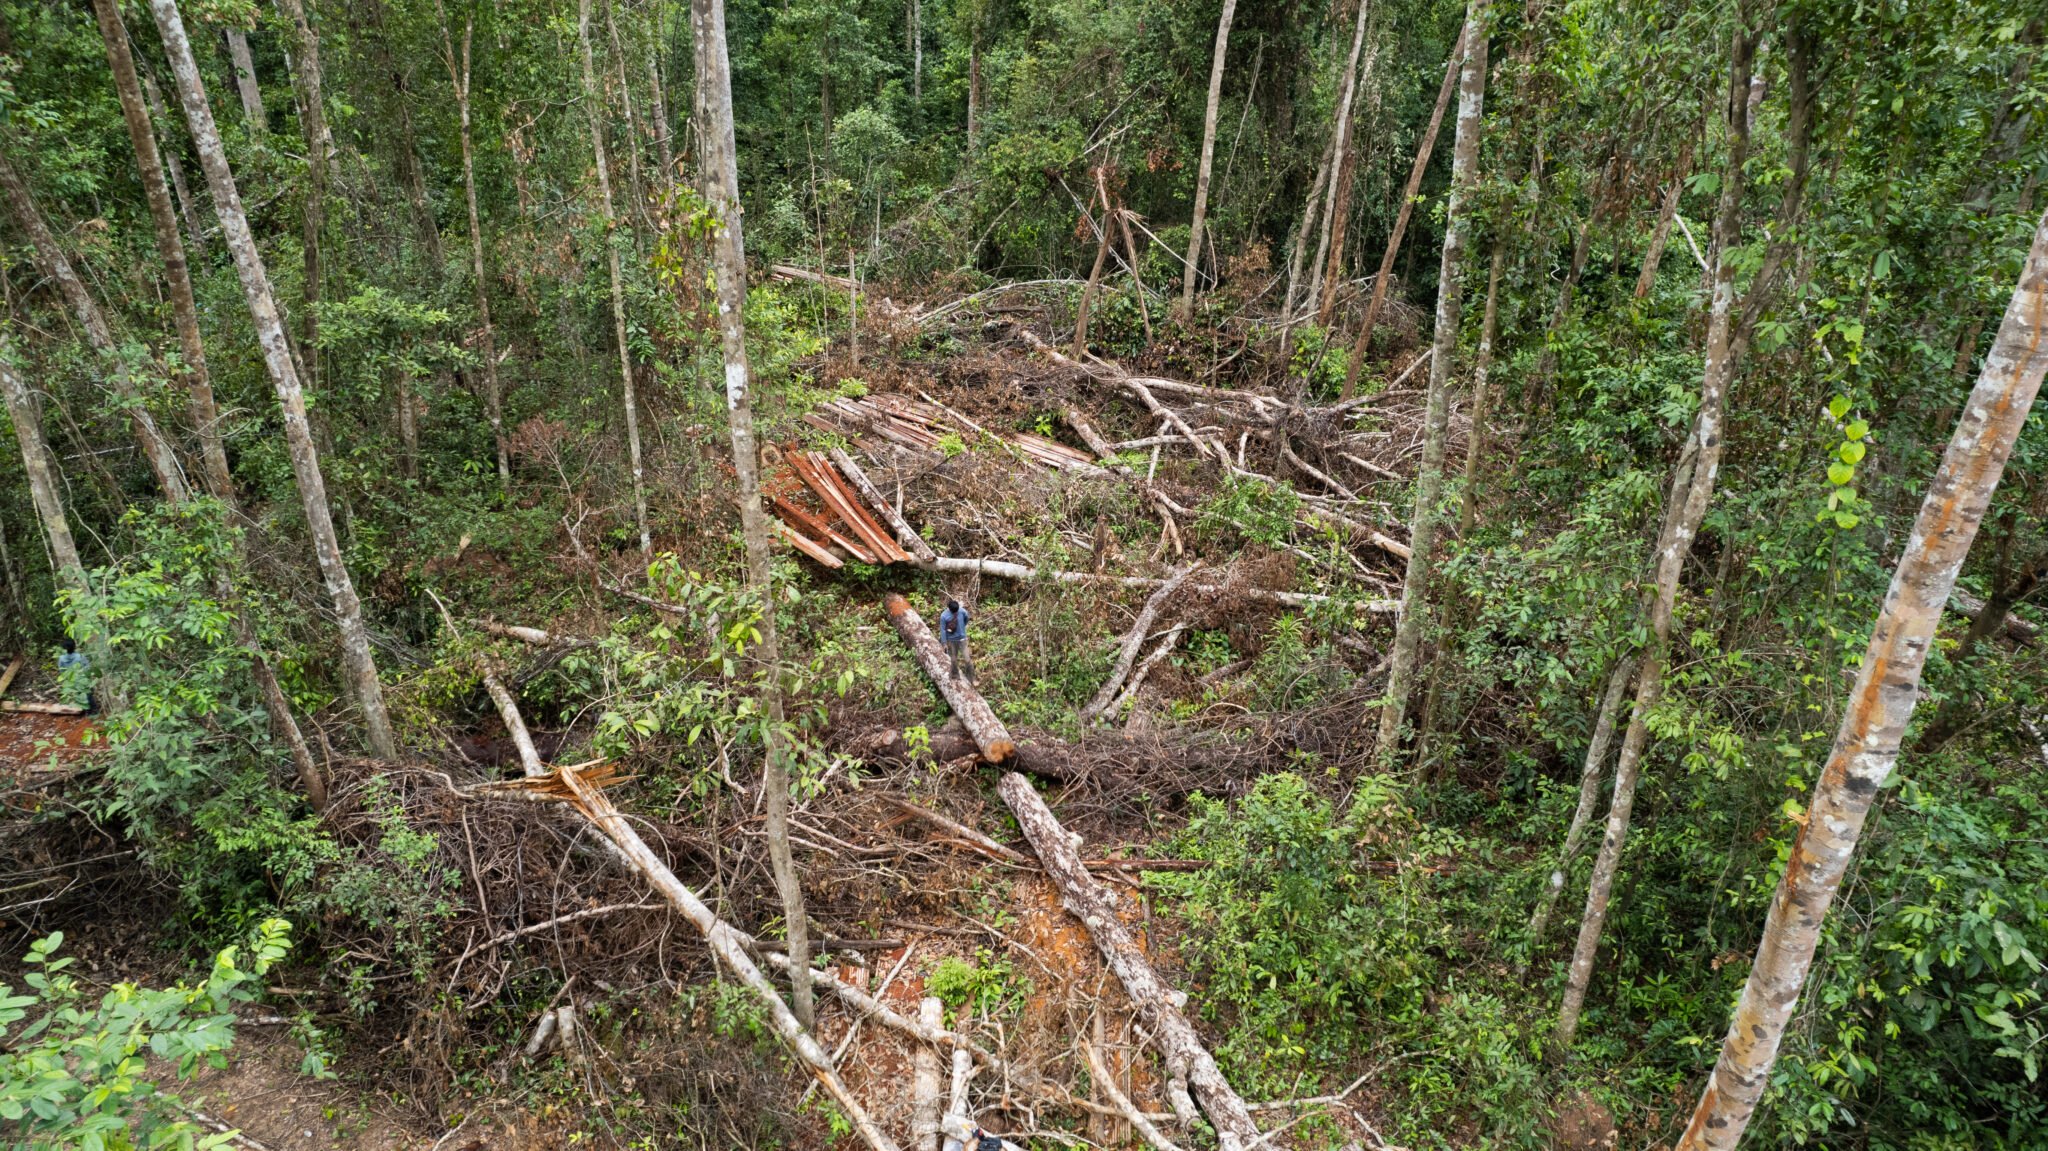 Cambodia’s land grab endangers people, forests, and the climate